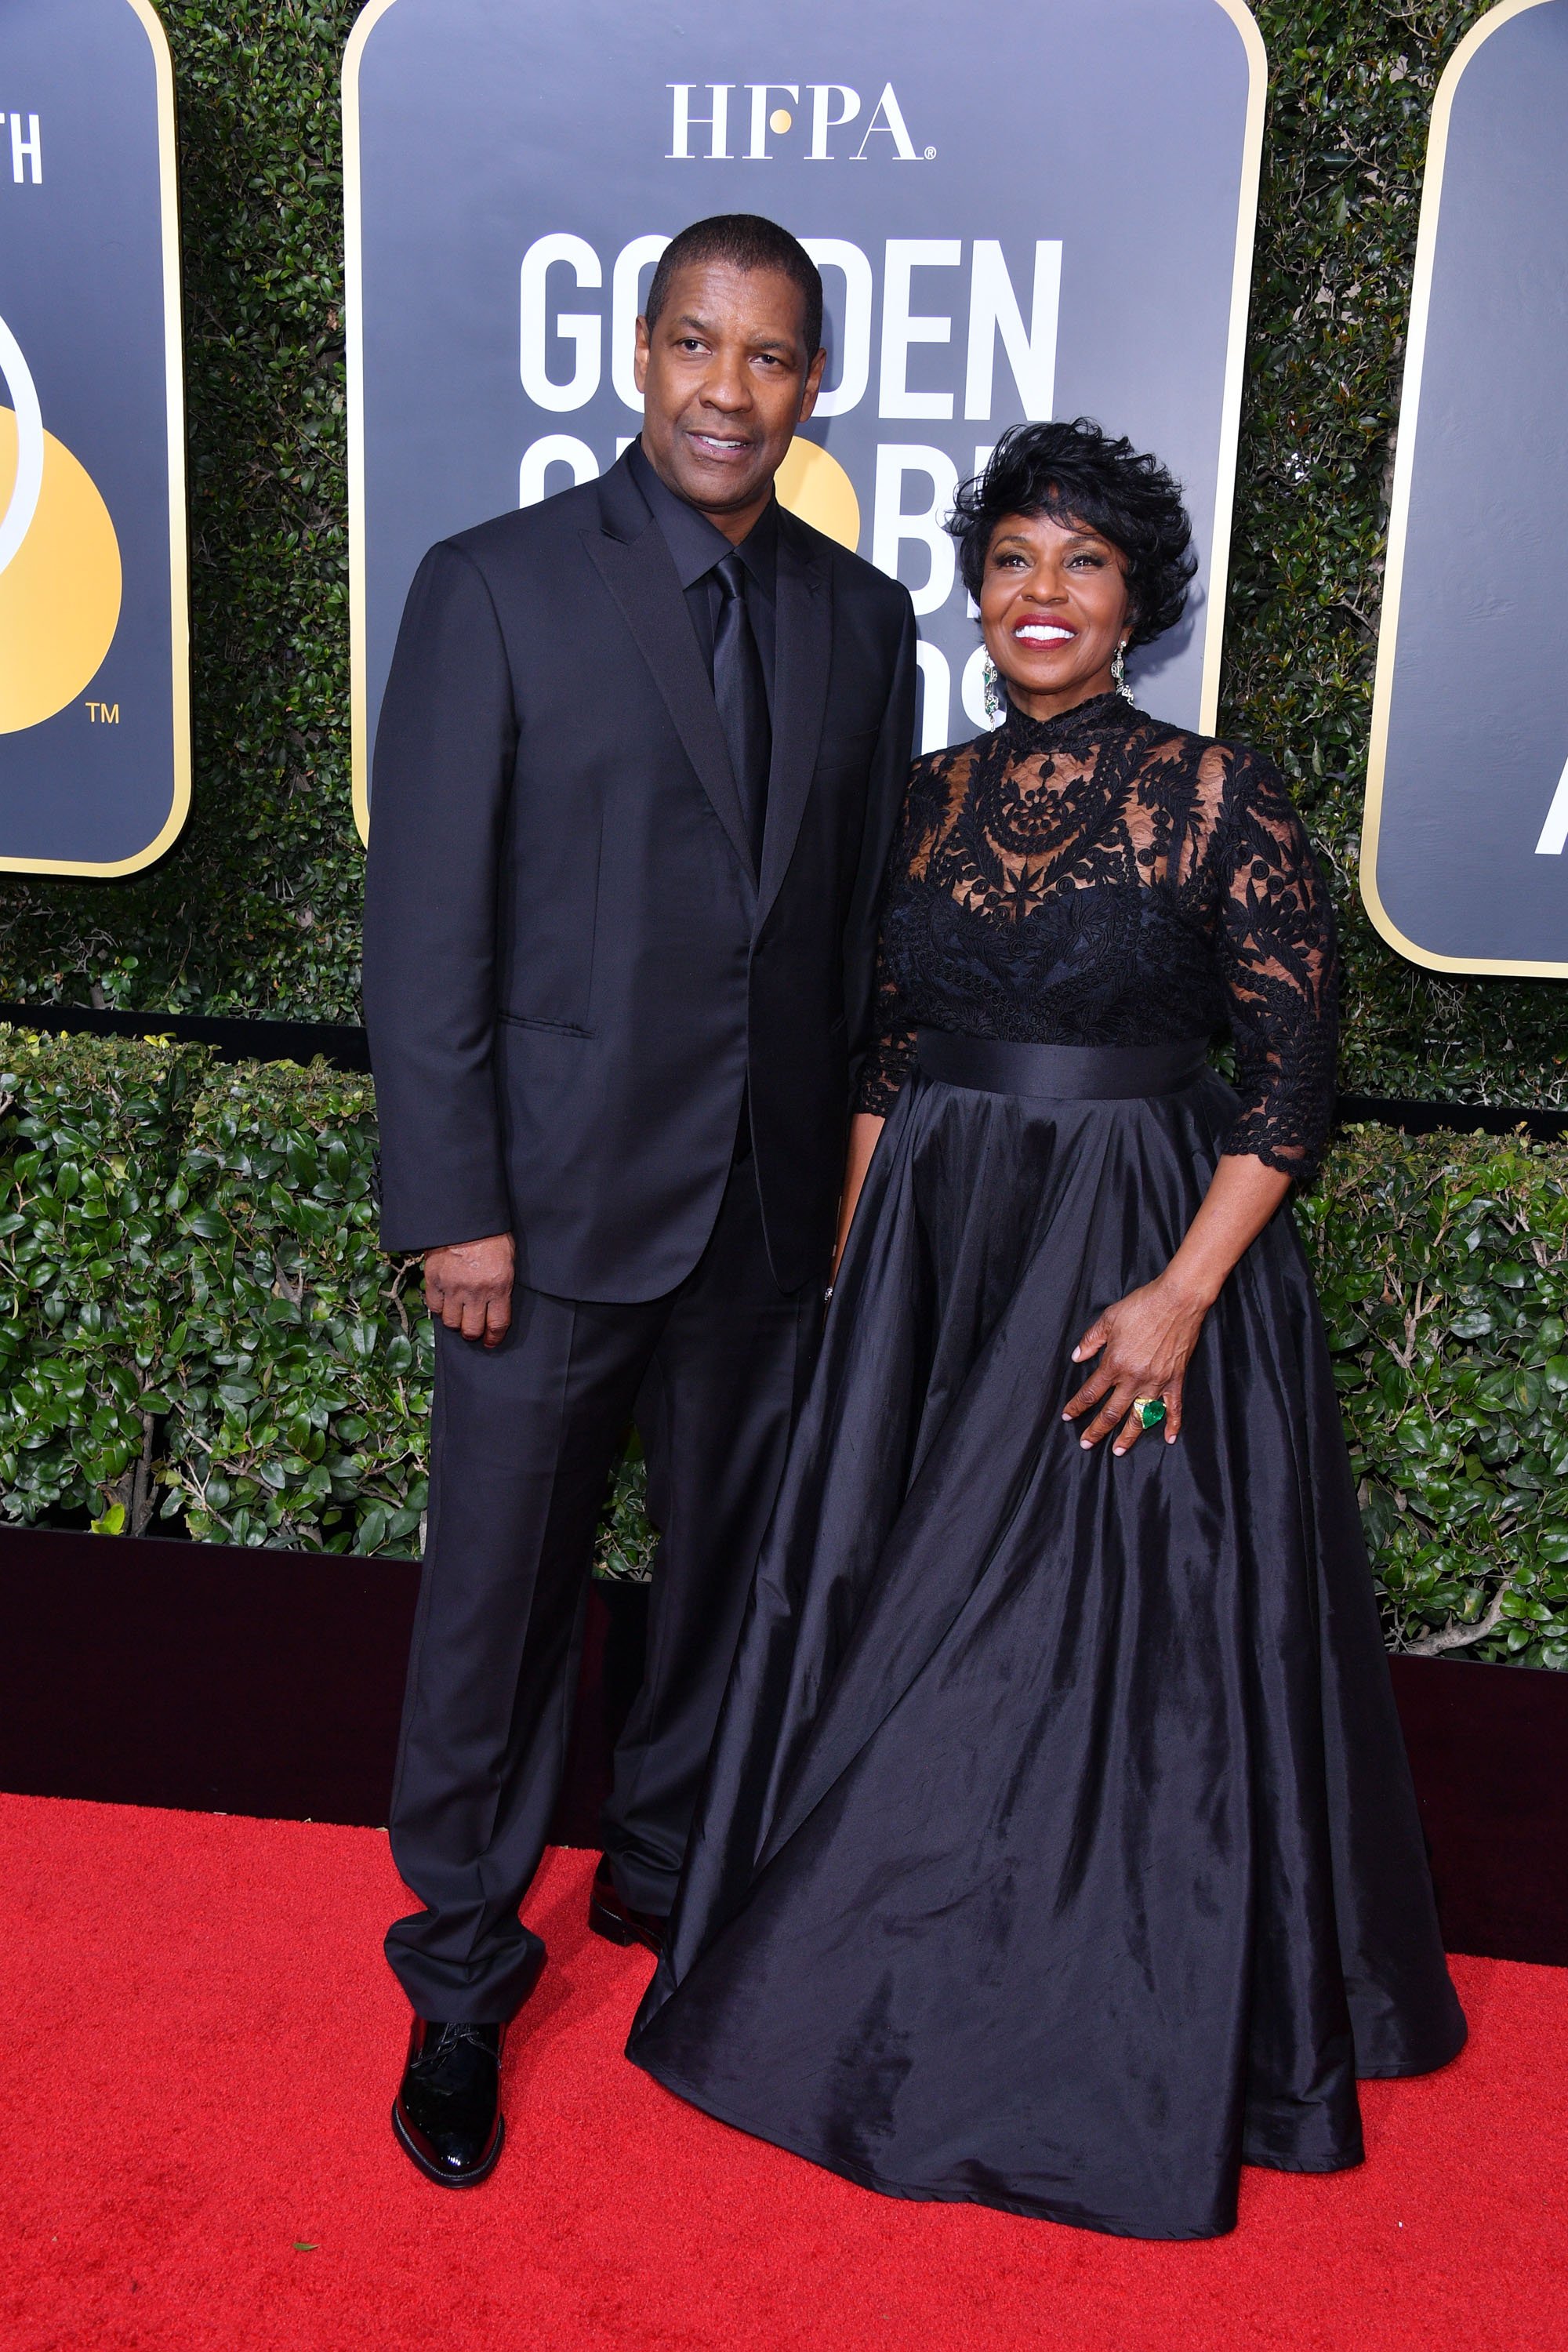 Actor Denzel Washington and Pauletta Washington at The 75th Annual Golden Globe Awards at The Beverly Hilton Hotel on January 7, 2018 in Beverly Hills, California. | Source: Getty Images